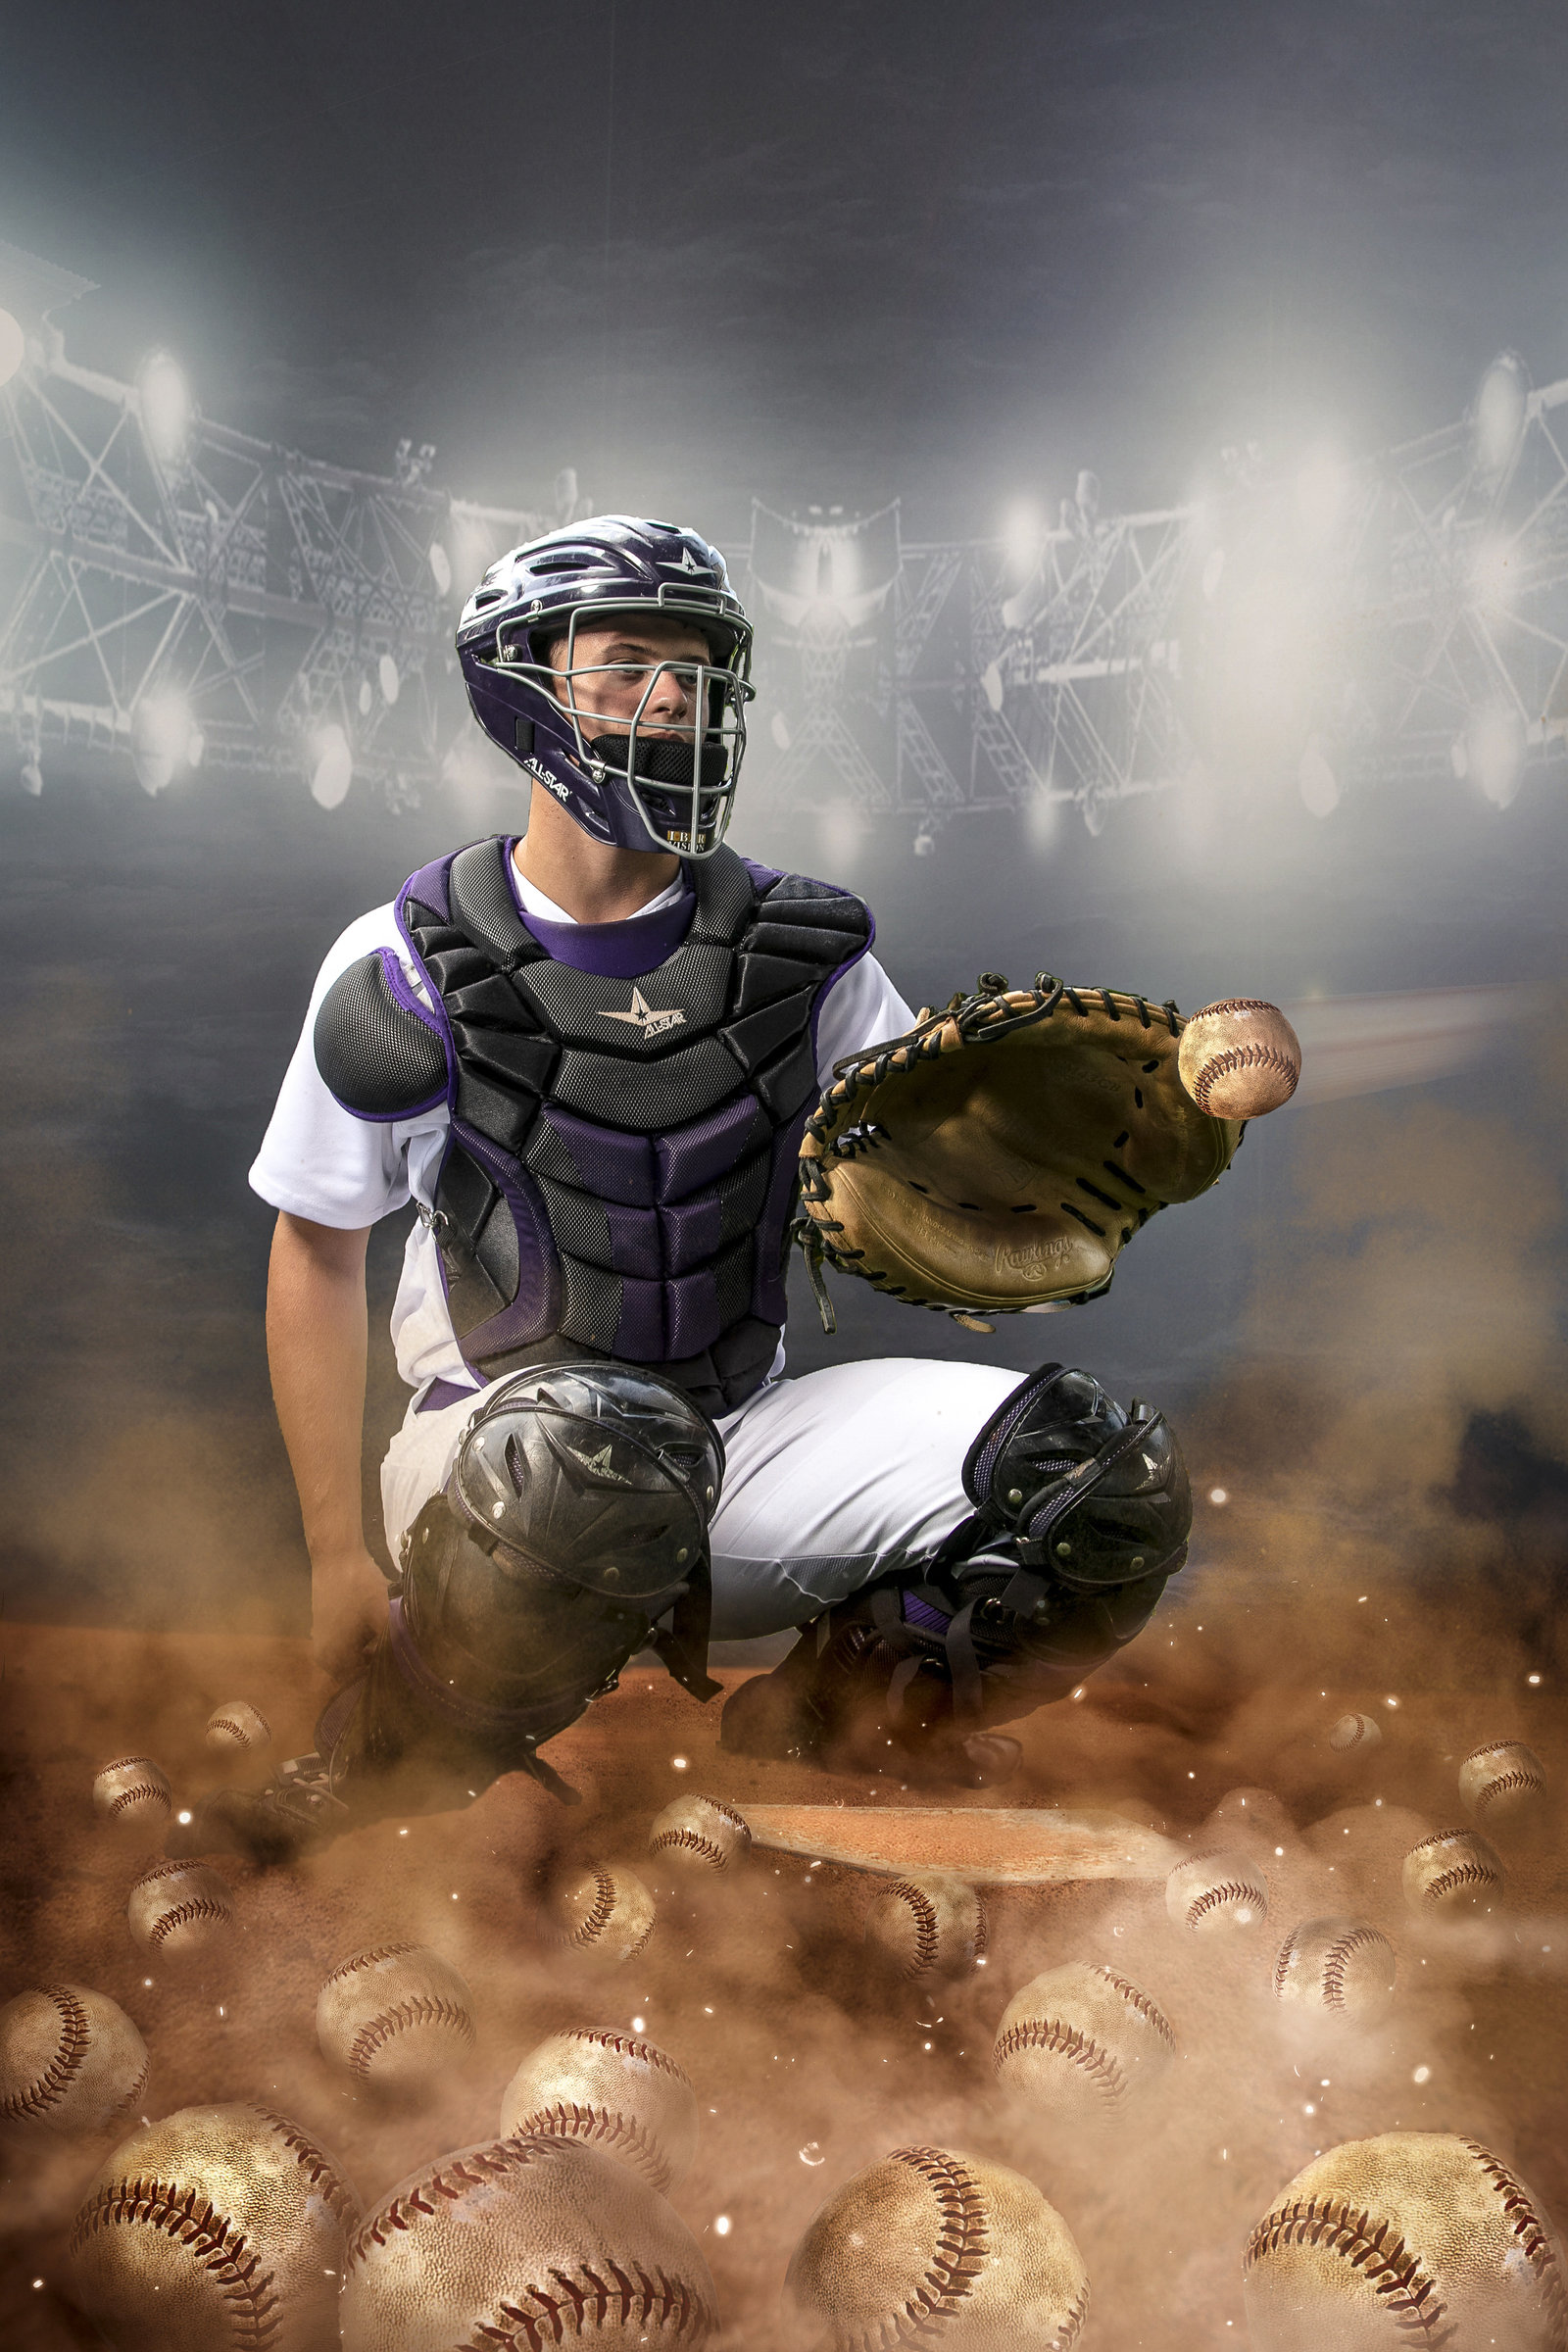 Catcher at Night with Balls